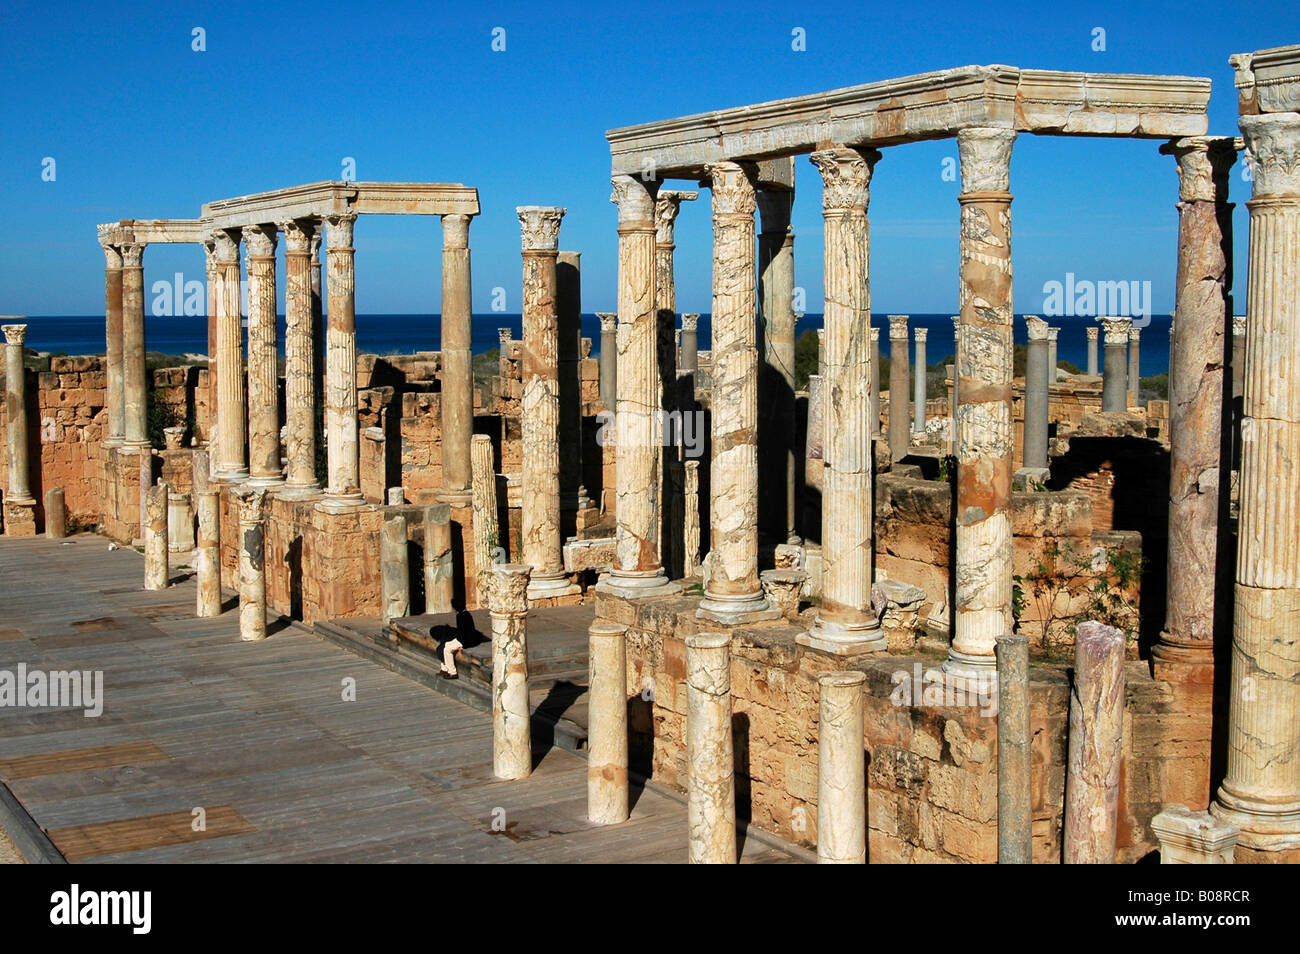 Stone columns, Roman ruins of the amphitheater stage at Leptis, Libya, North Africa Stock Photo